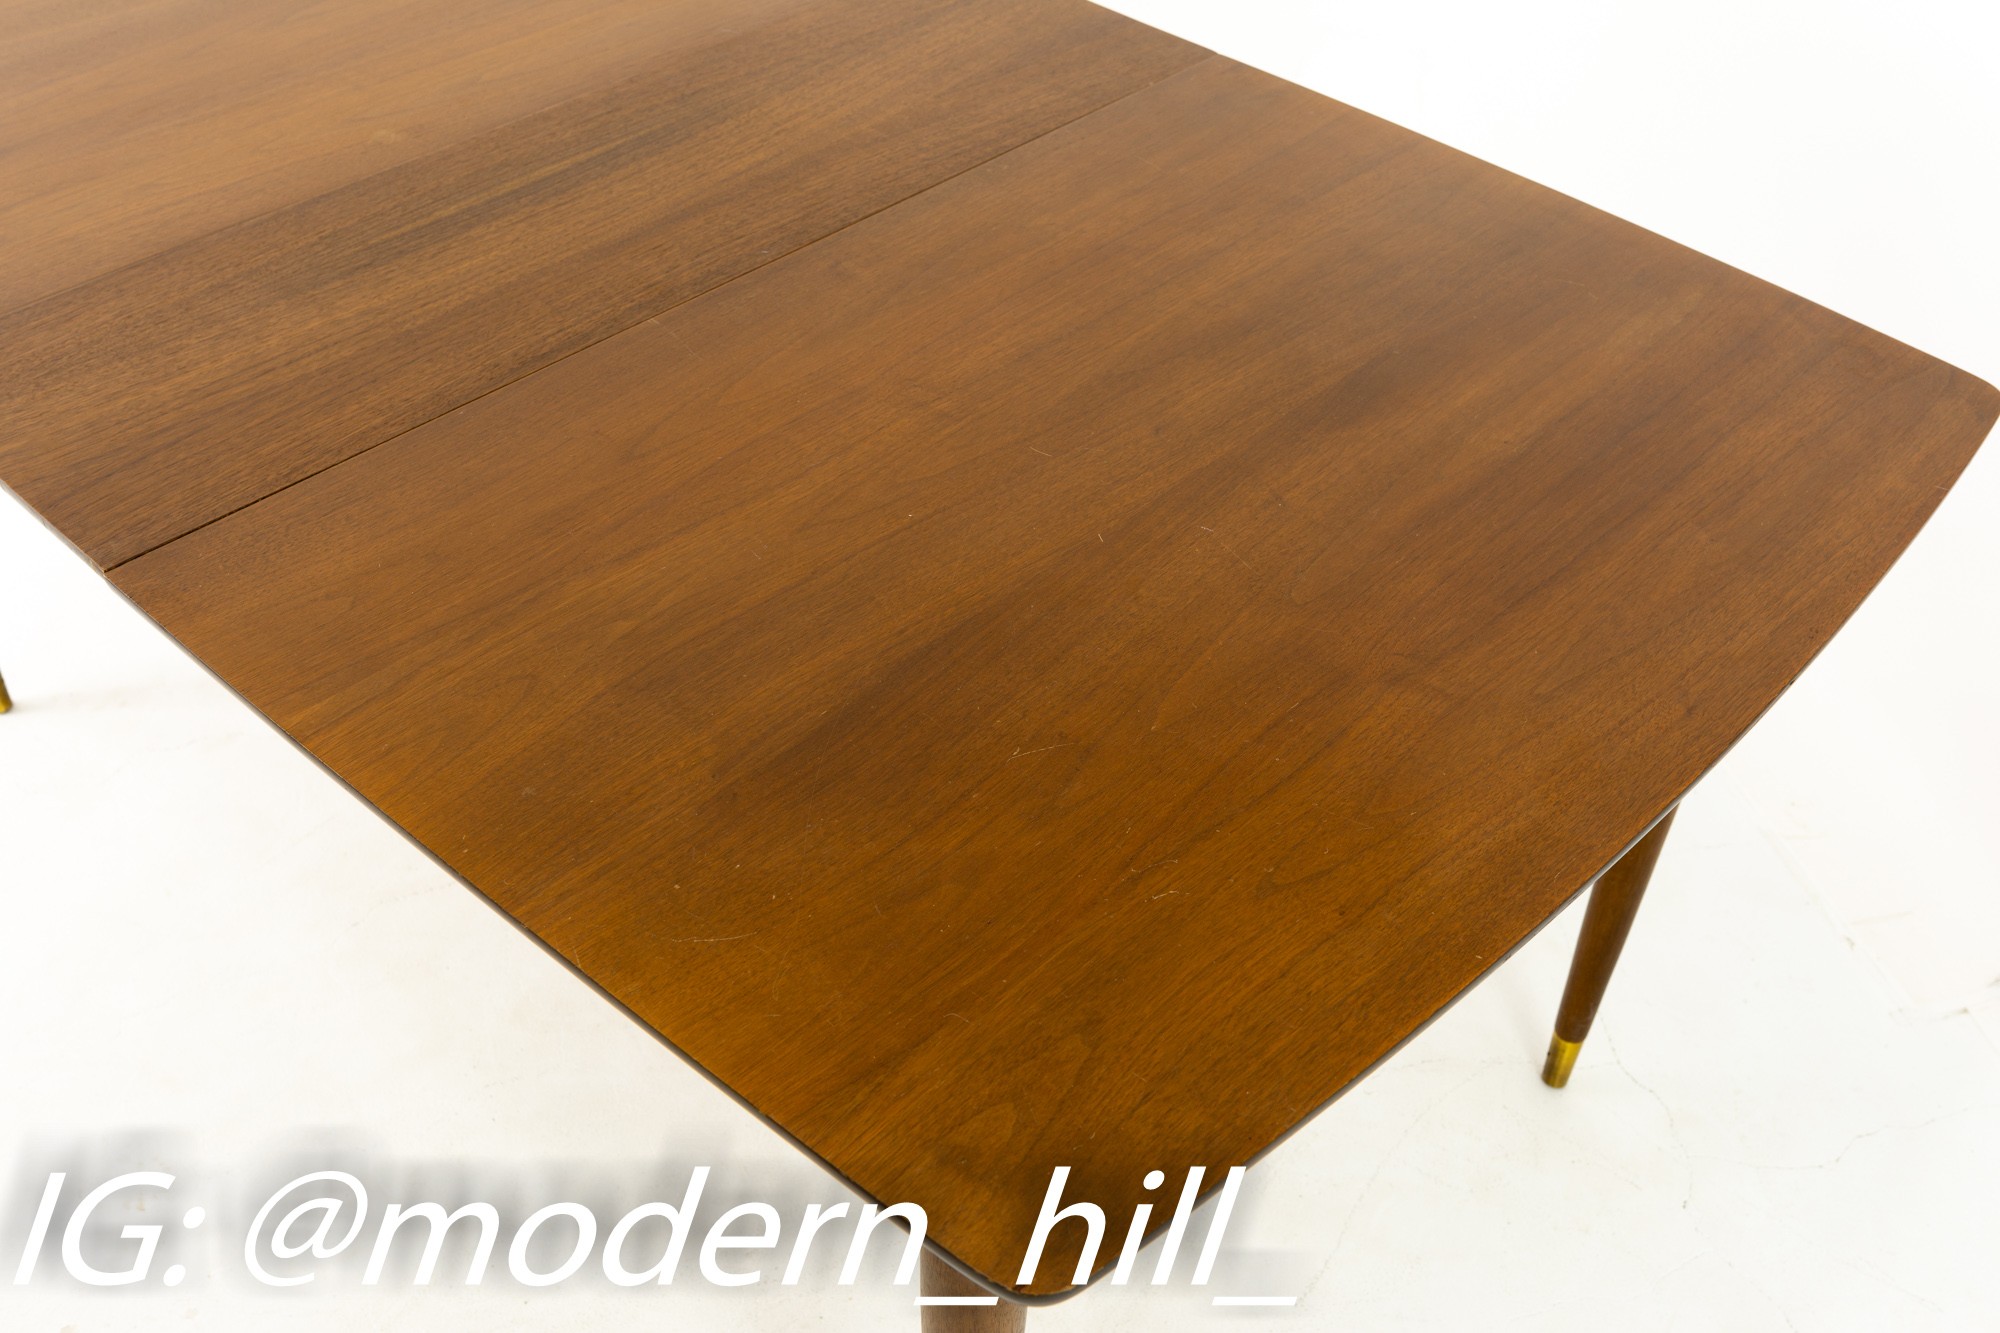 Stanley Furniture Mid Century Walnut and Brass Expanding Dining Table